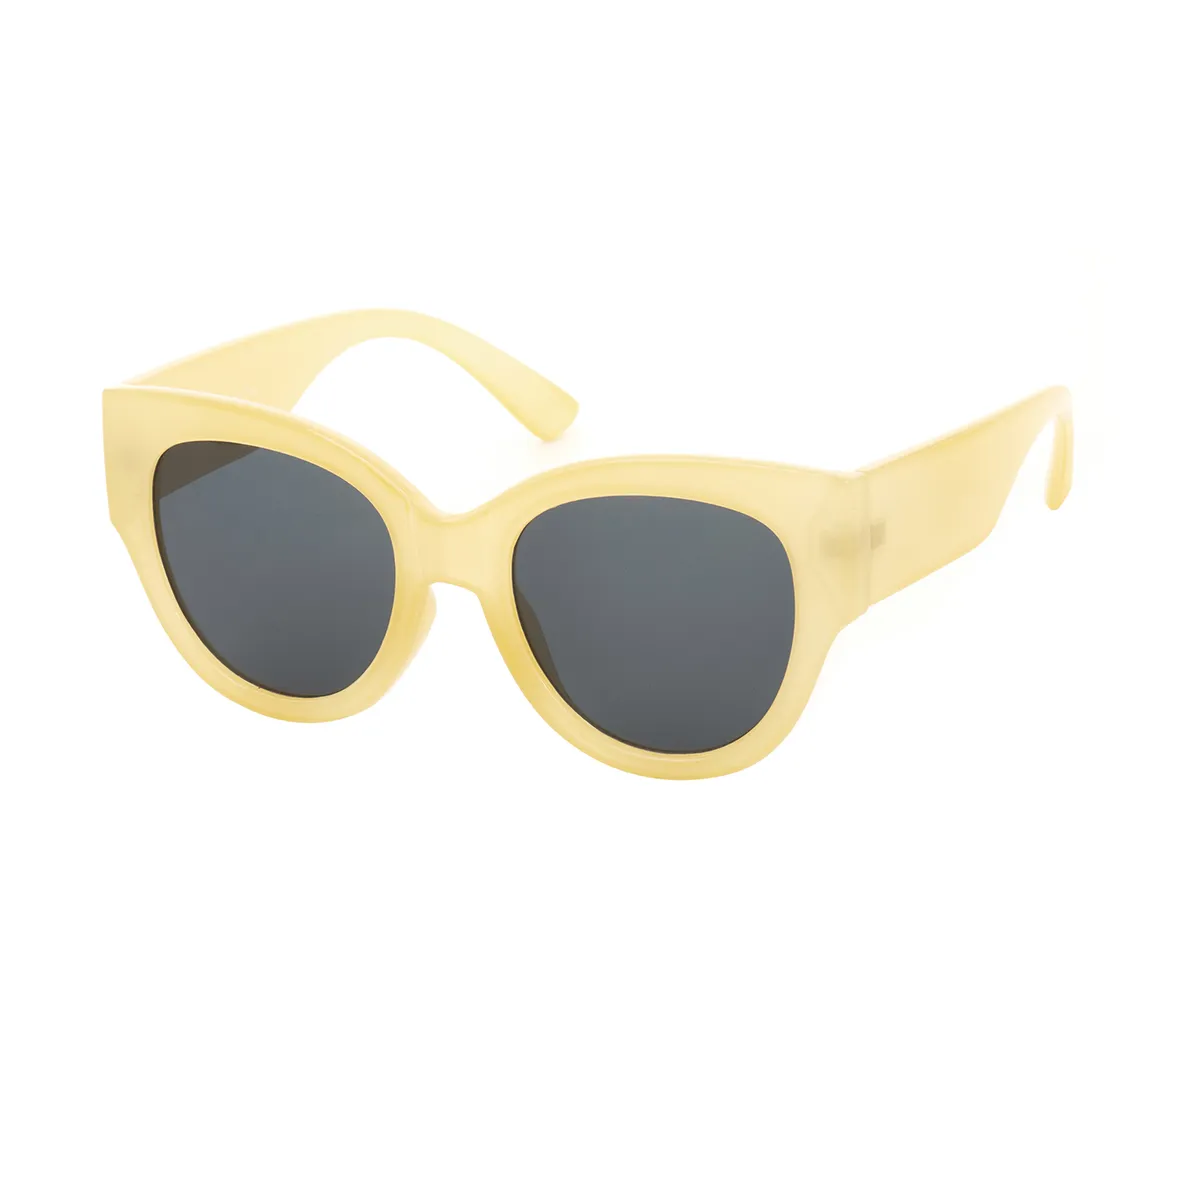 Alie - Oval Yellow Sunglasses for Women